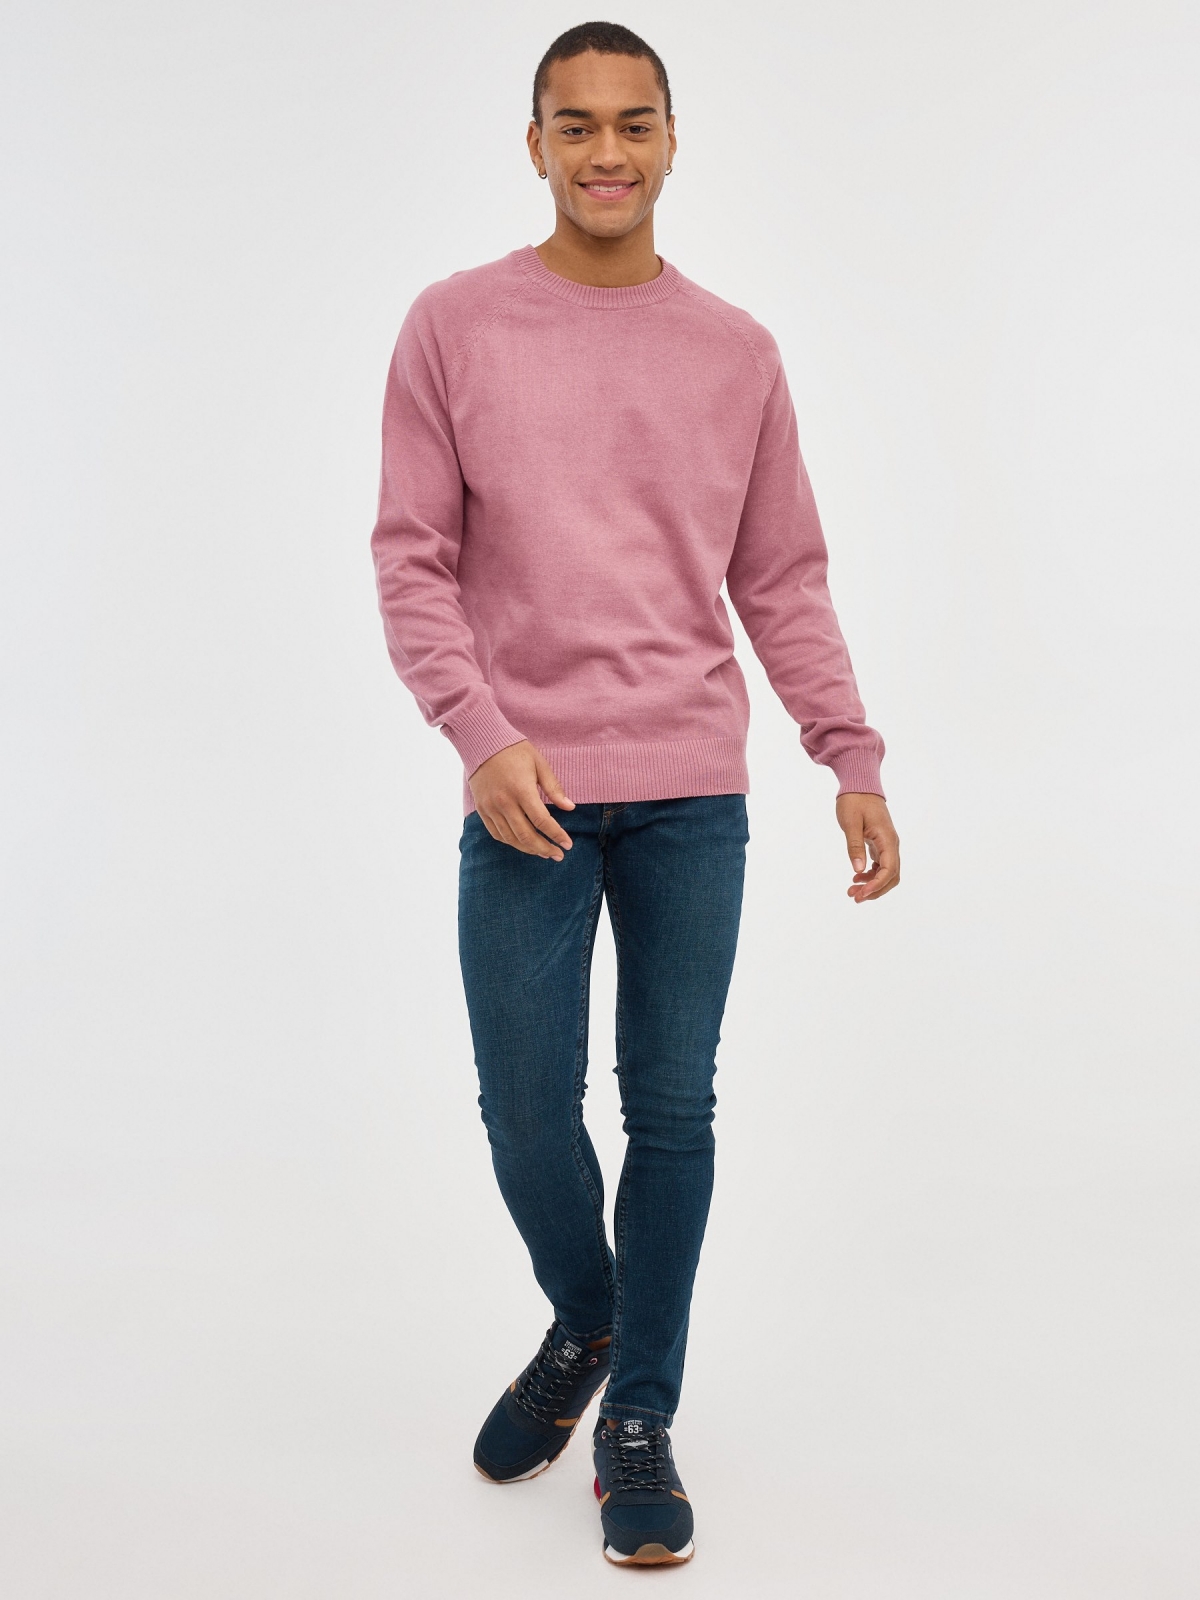 Basic Round Pullover powdered pink front view